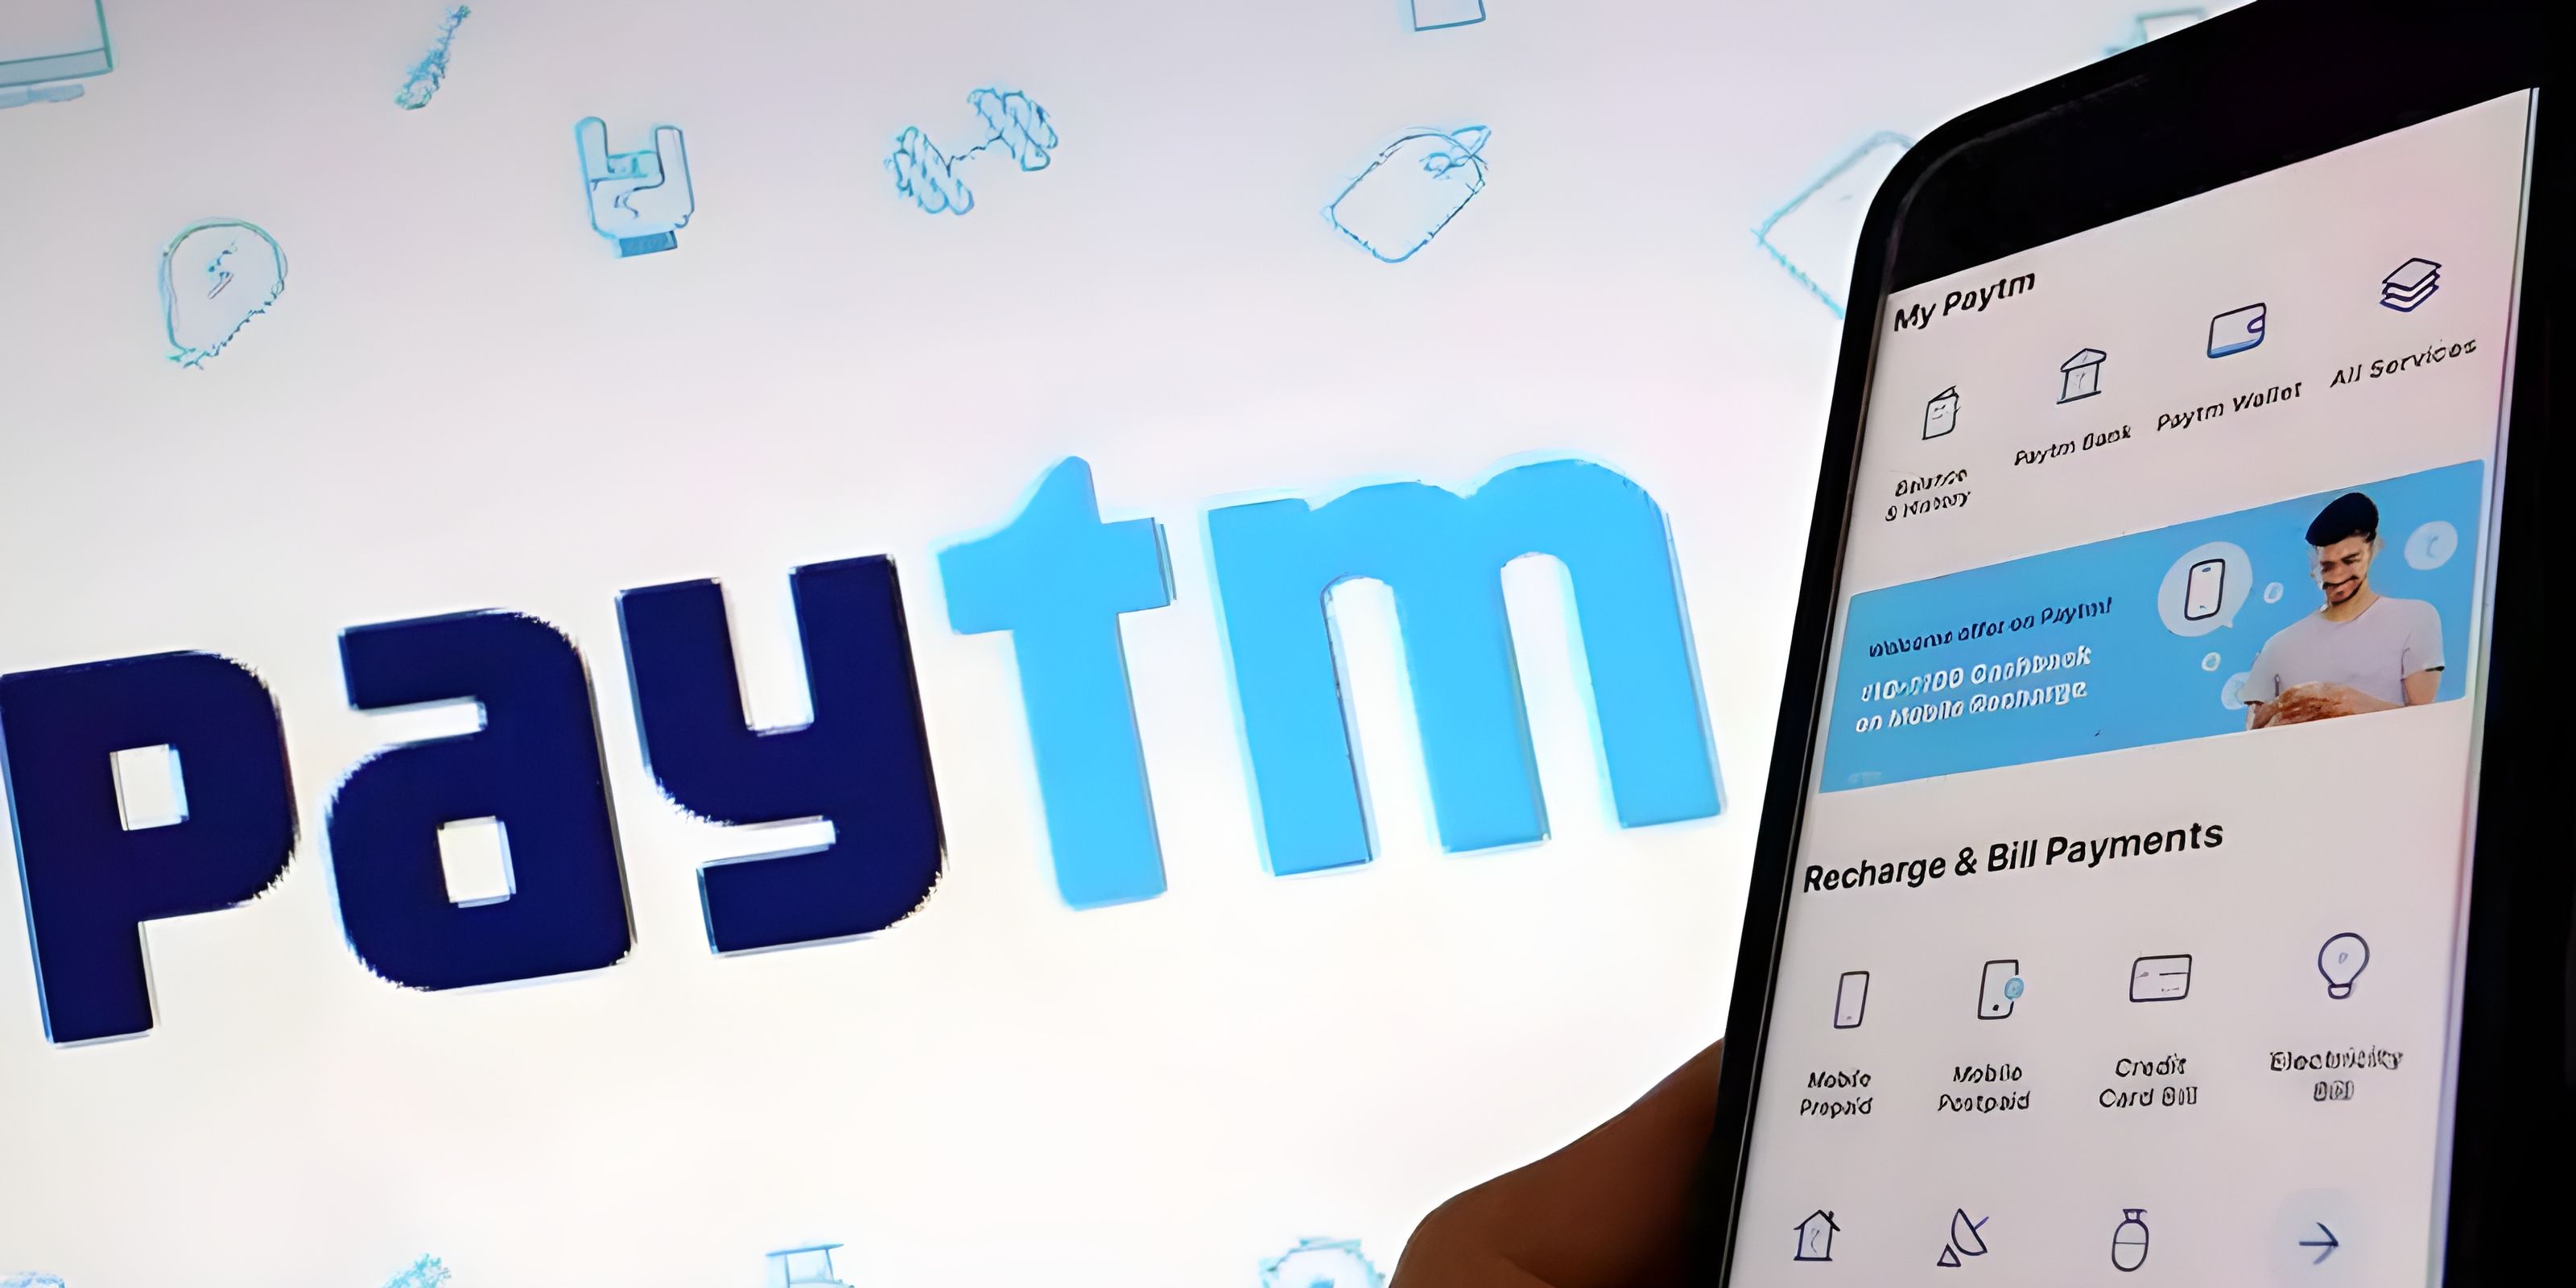 Paytm dials down on low-value loans to focus on high-ticket lending